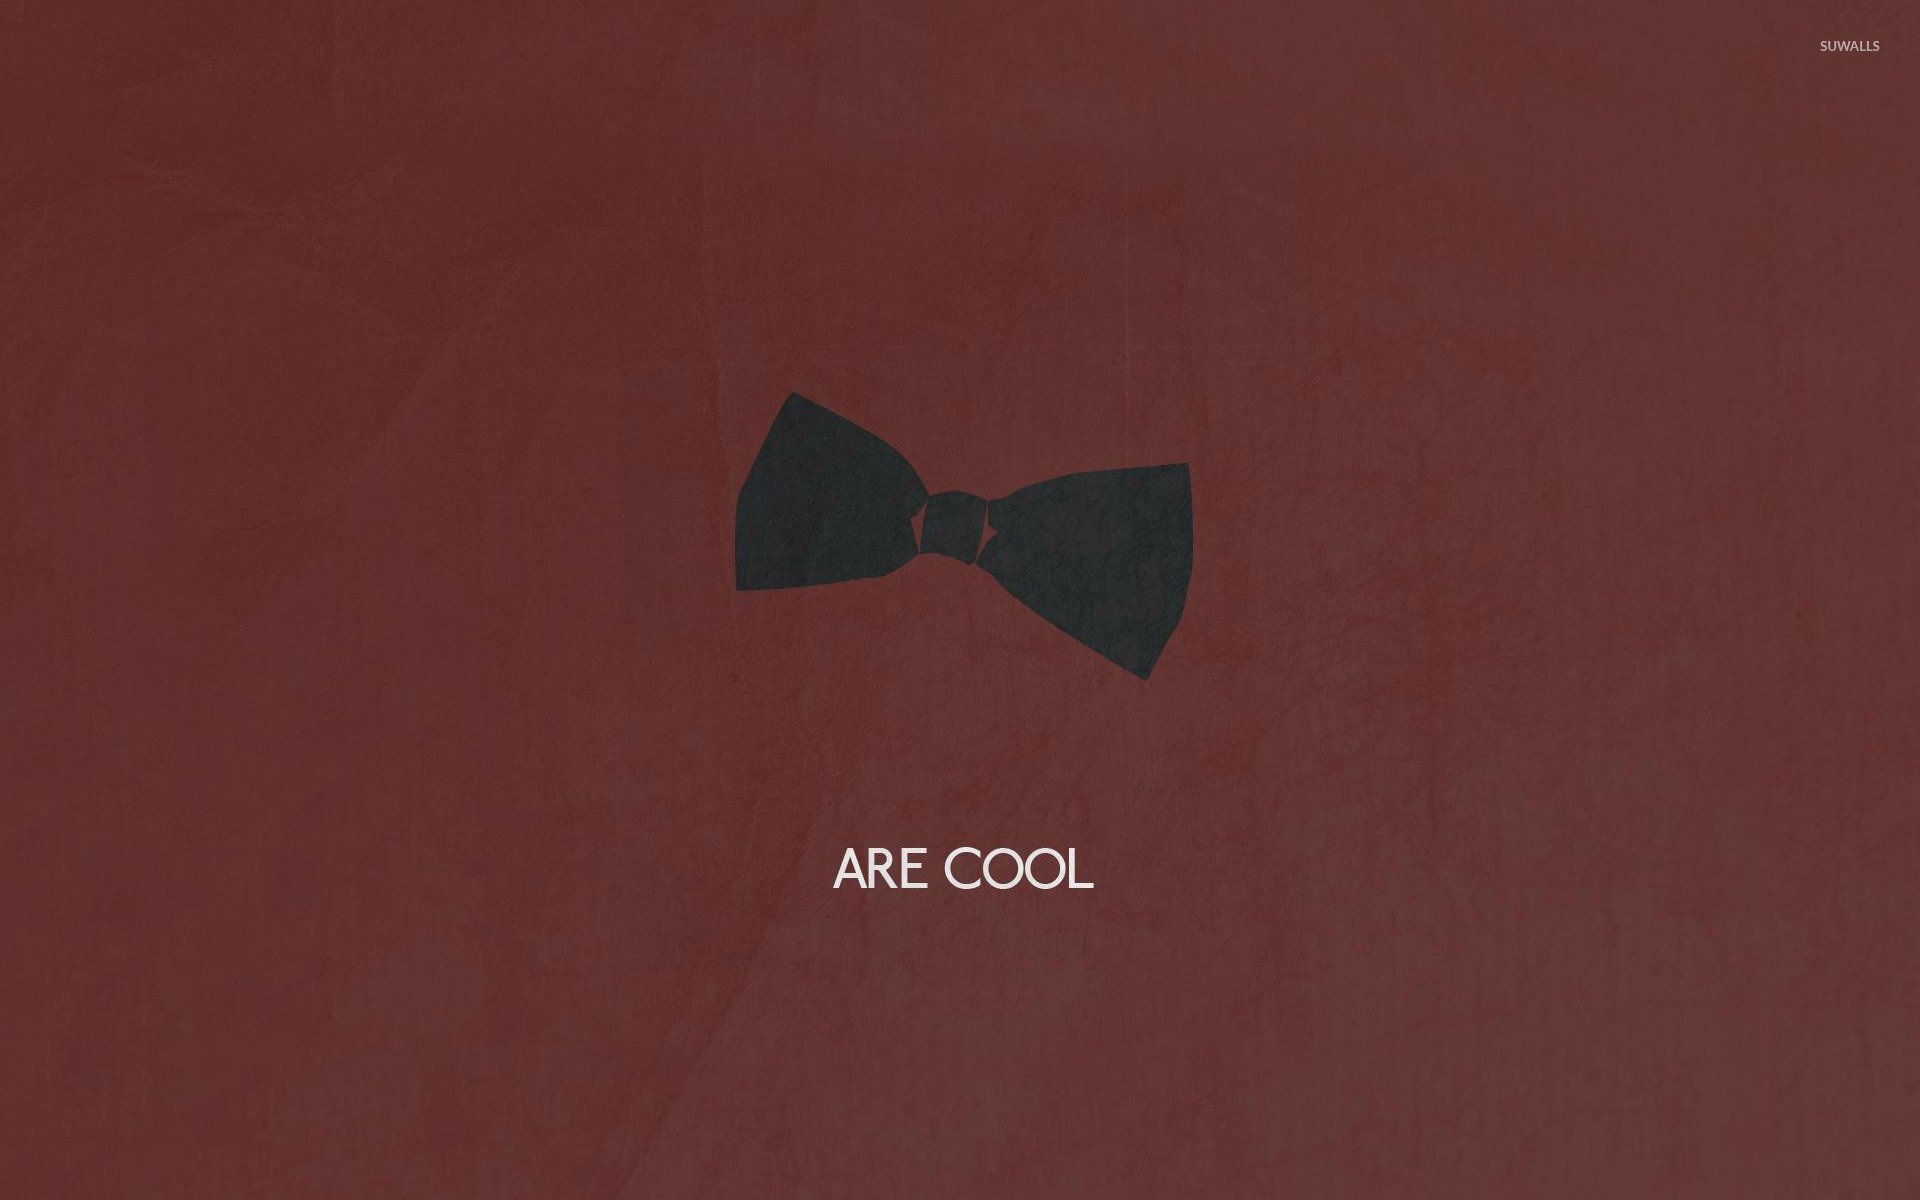 Bow ties are cool wallpaper   Vector wallpapers   27497